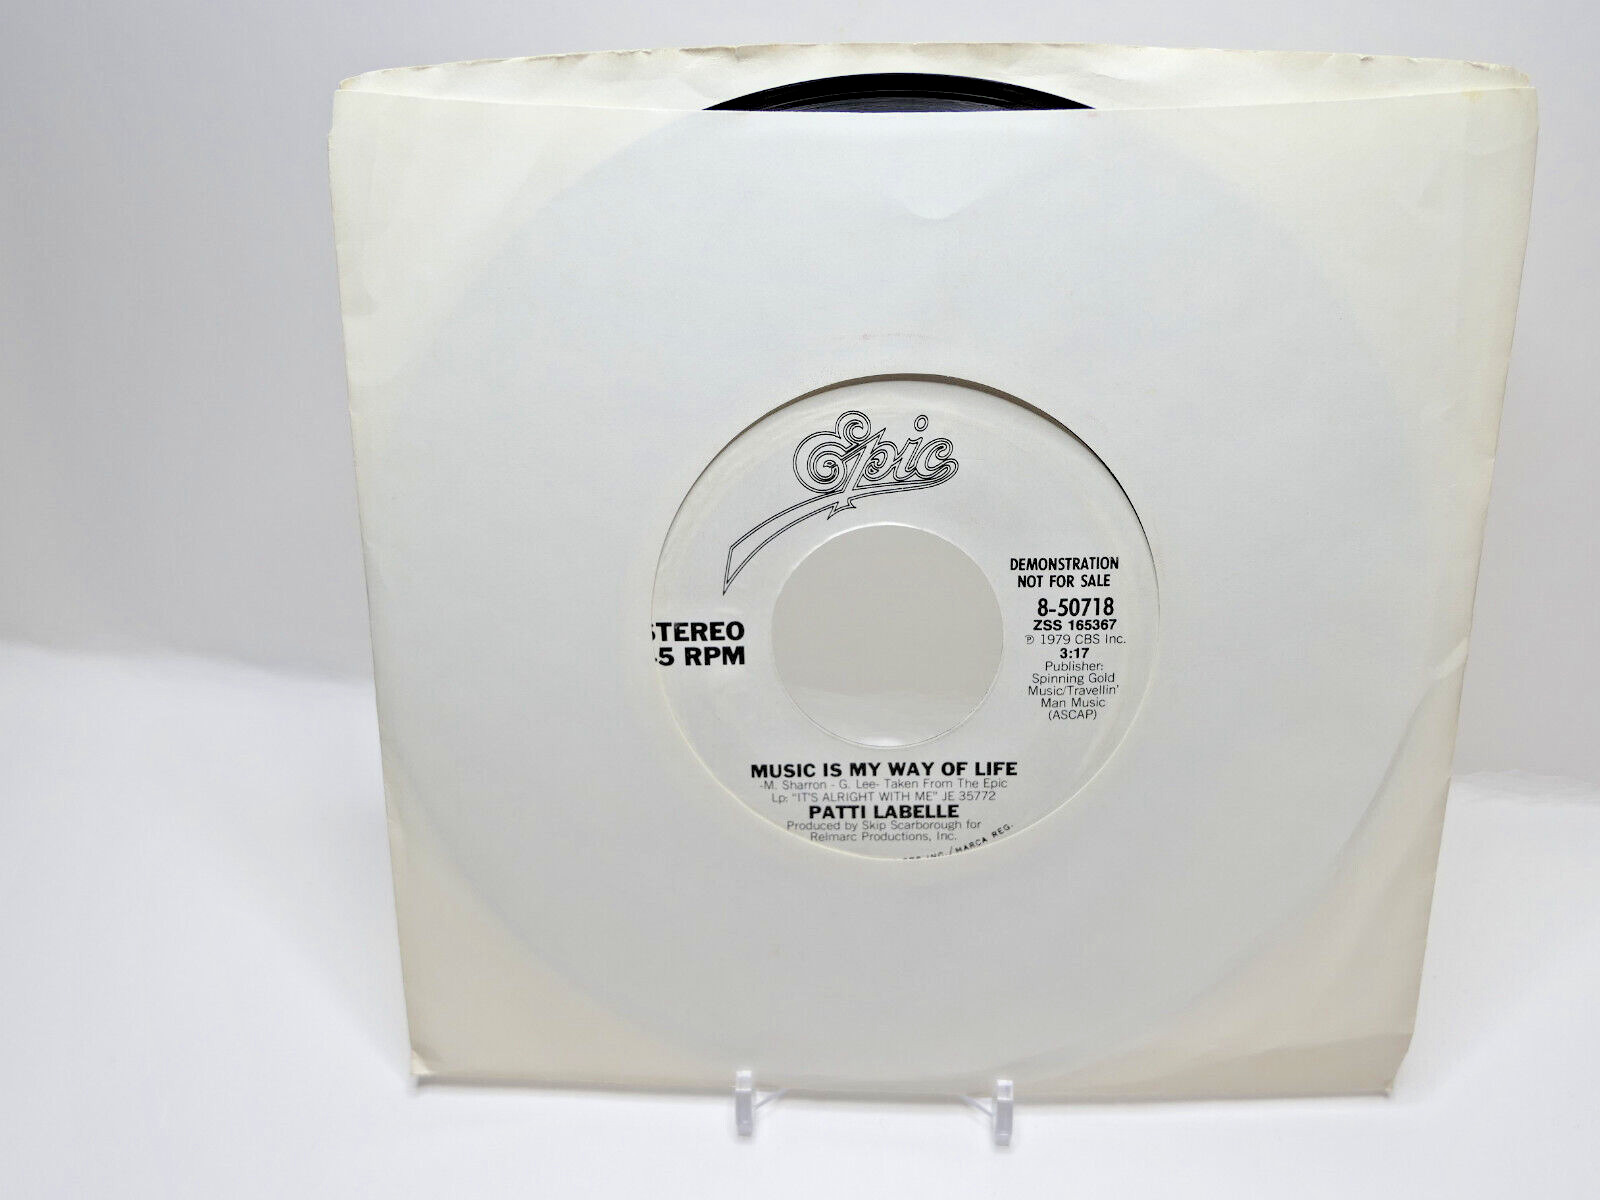 Patti LaBelle ‎– Music Is My Way Of Life / 1979 8-50718 / 45 RPM, Promo EX+